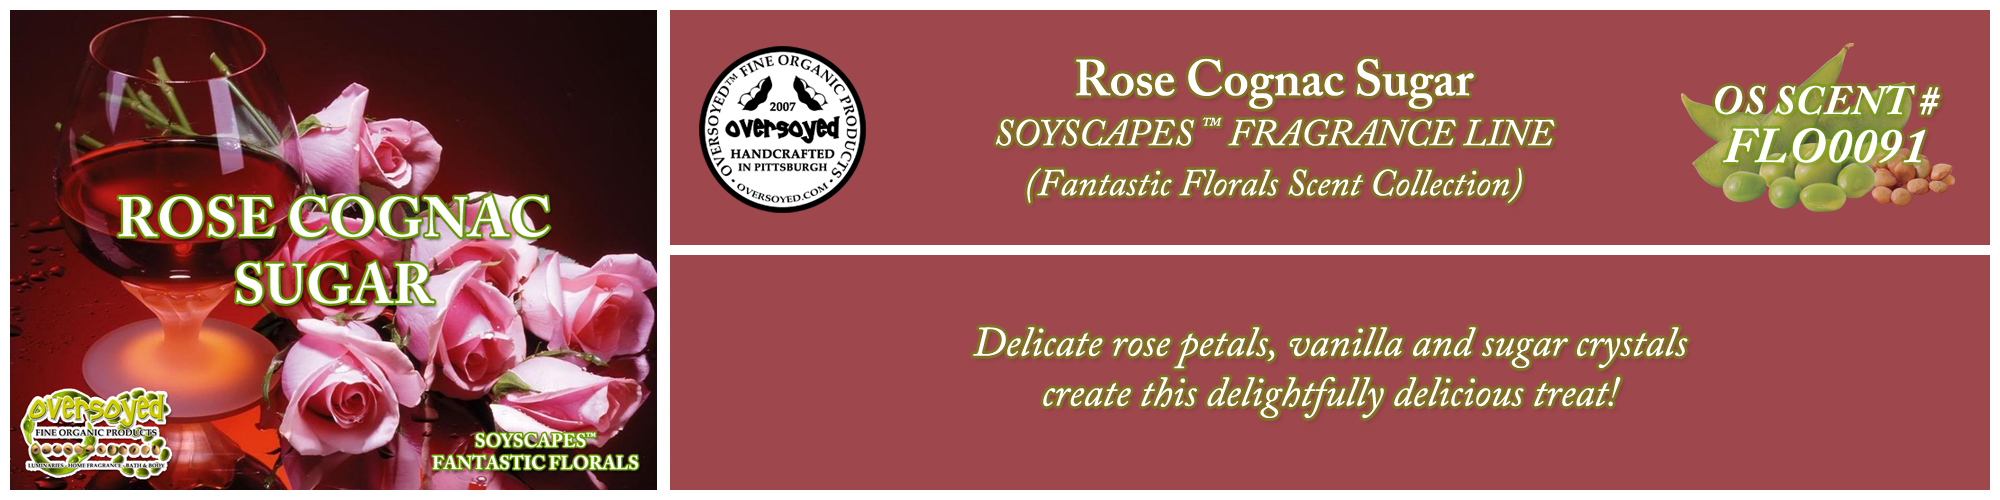 Rose Cognac Sugar Handcrafted Products Collection